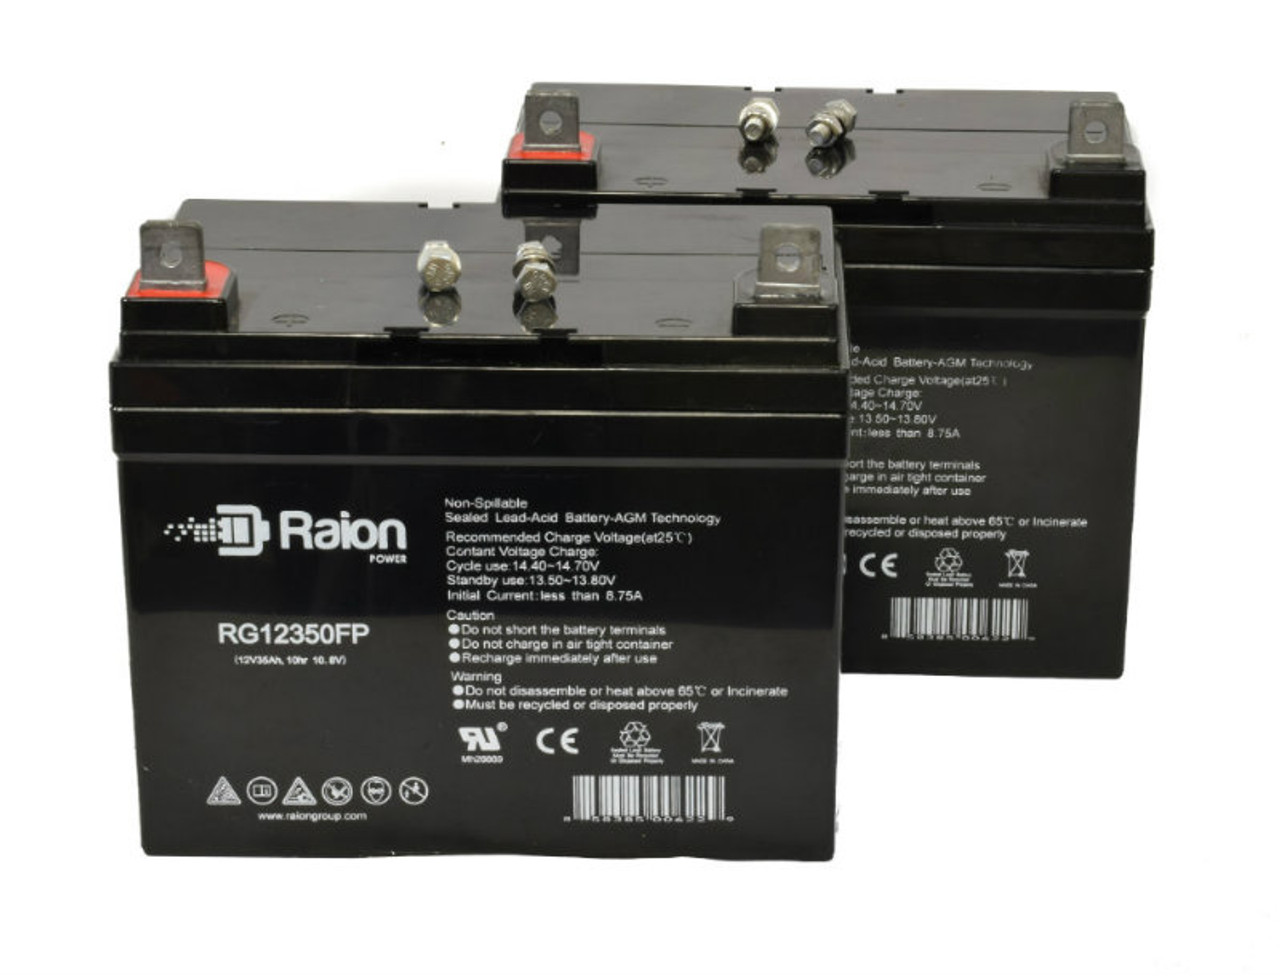 Raion Power Replacement 12V 35Ah Lawn Mower Battery for Kubota M1230 - 2 Pack